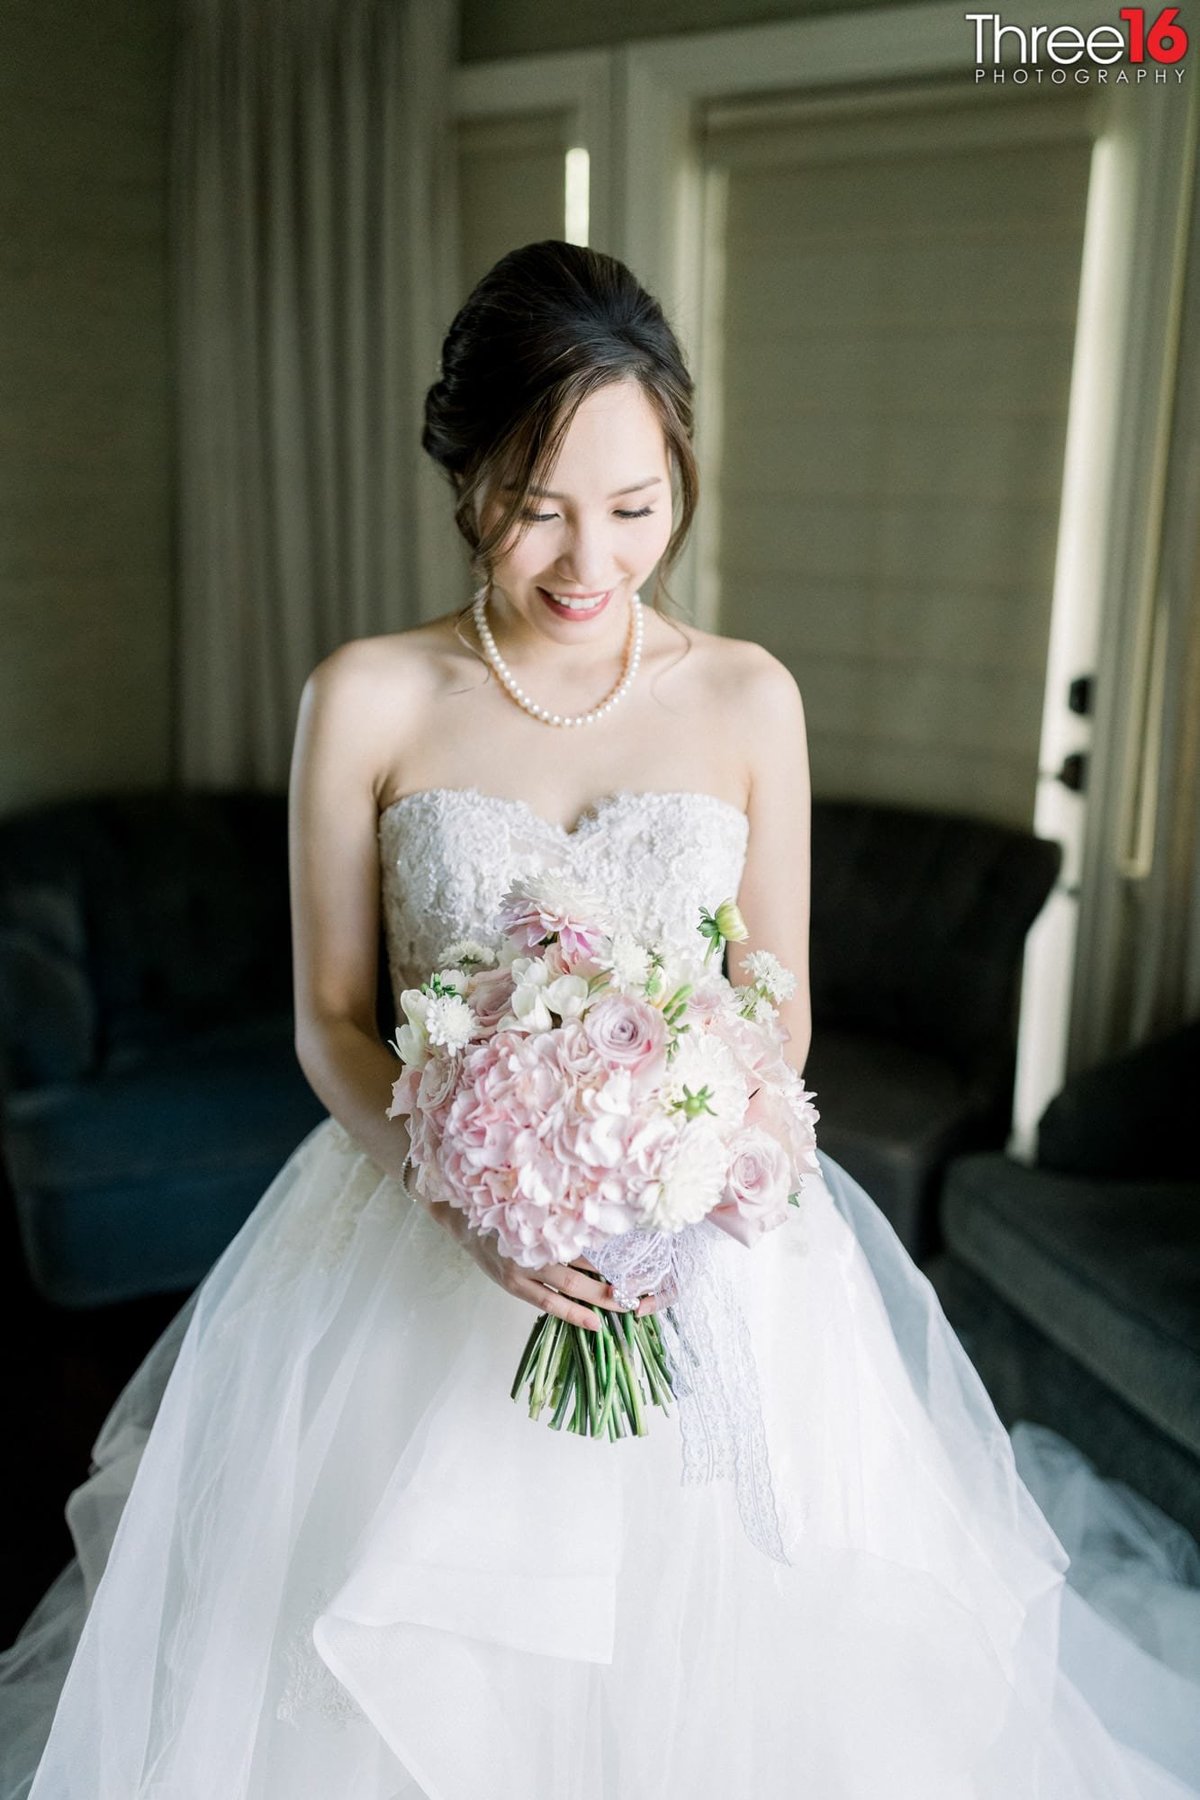 Bride poses before the wedding with her bouquet in hand